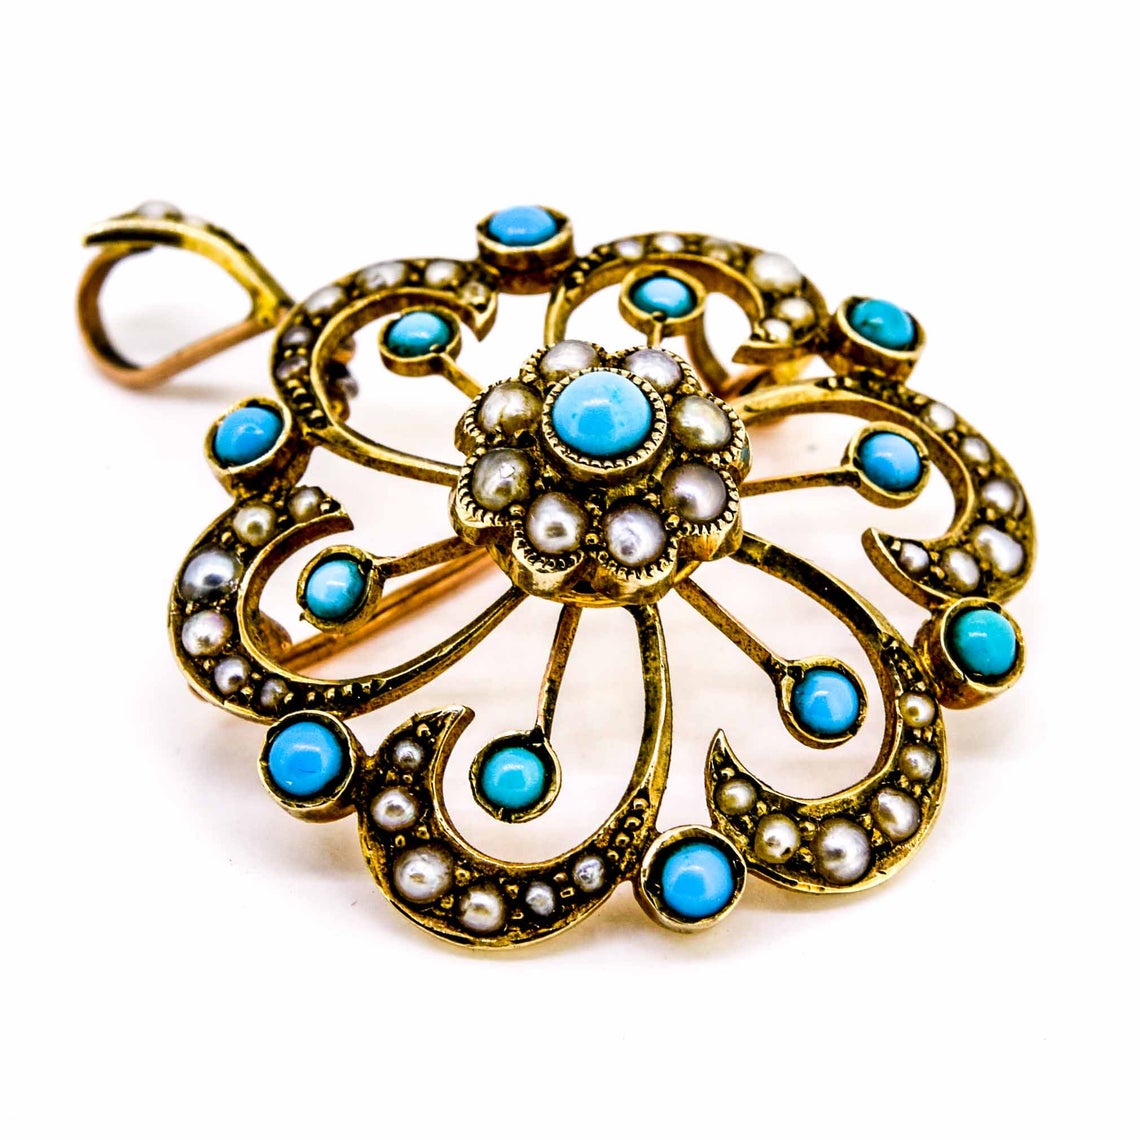 Victorian 9ct Gold Turquoise & Pearl Brooch / Pendant